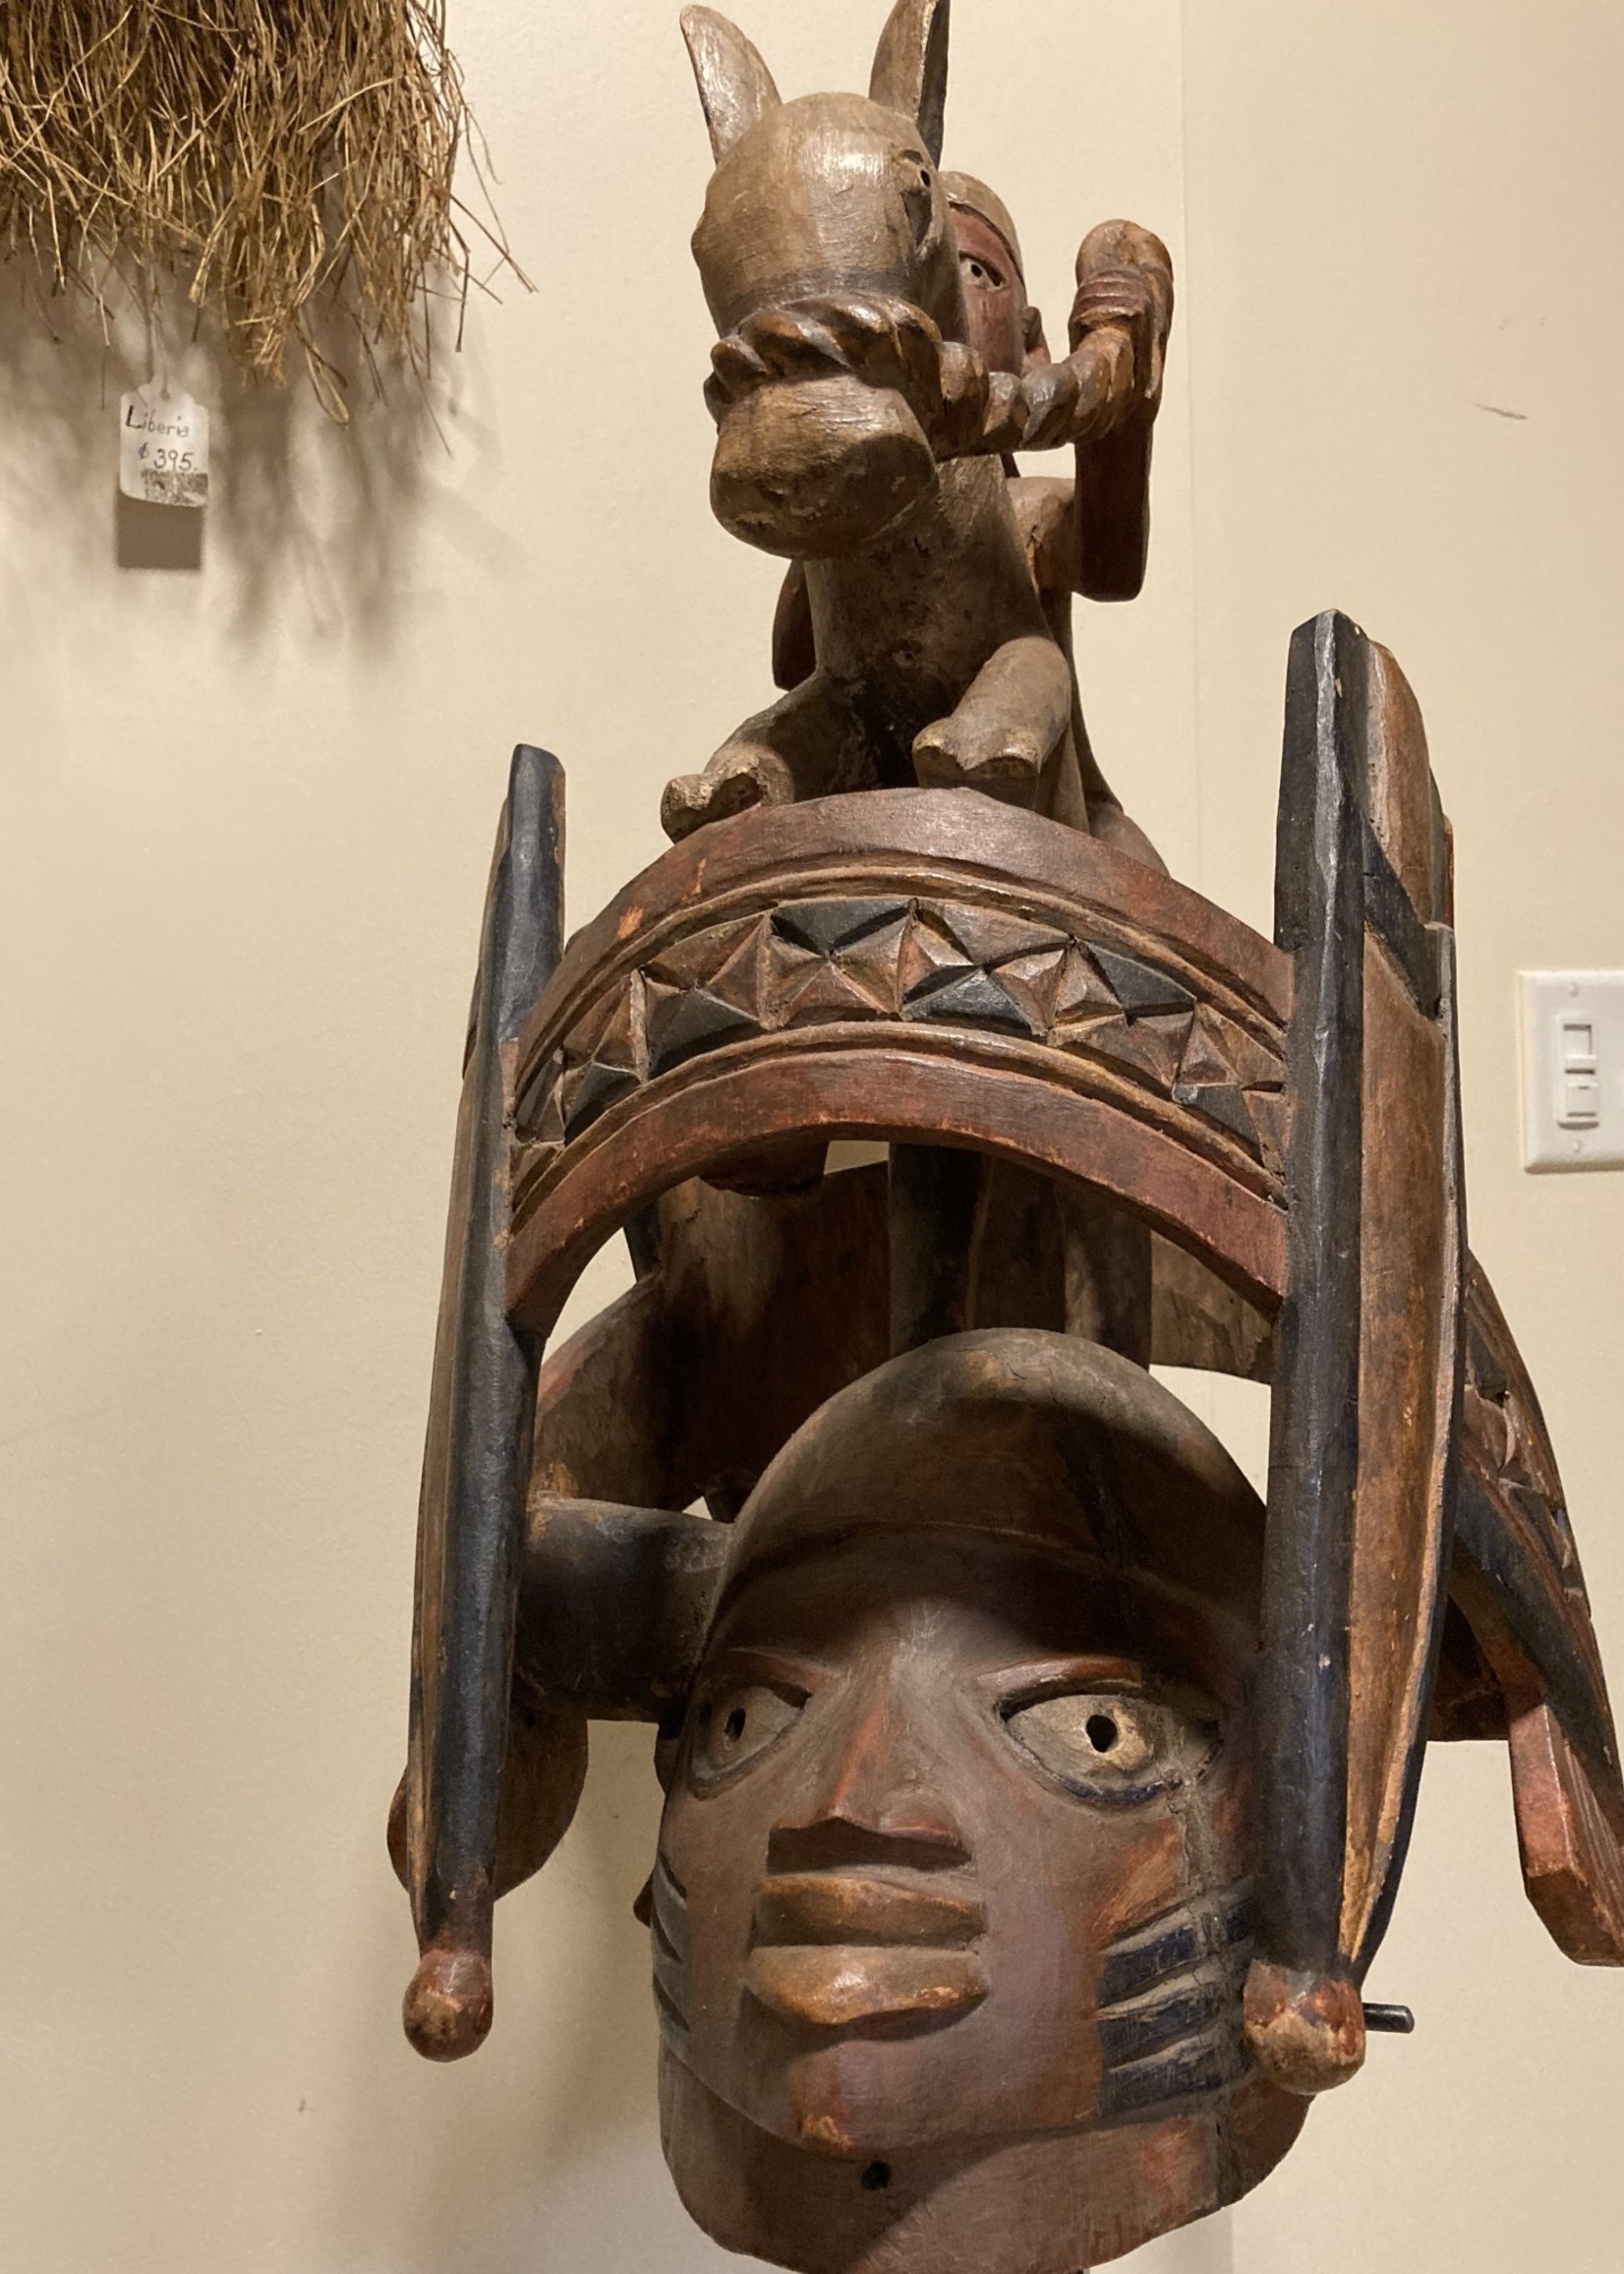 Yoruba Yoruba "Gelede" mask. The Yoruba created this celebration in the 20th century. It celebrates older women, known to have much power, in a month-long event. Nigeria; wood 57 3/4" h on stand, 17 1/4" d x 11 3/4" w. Includes stand